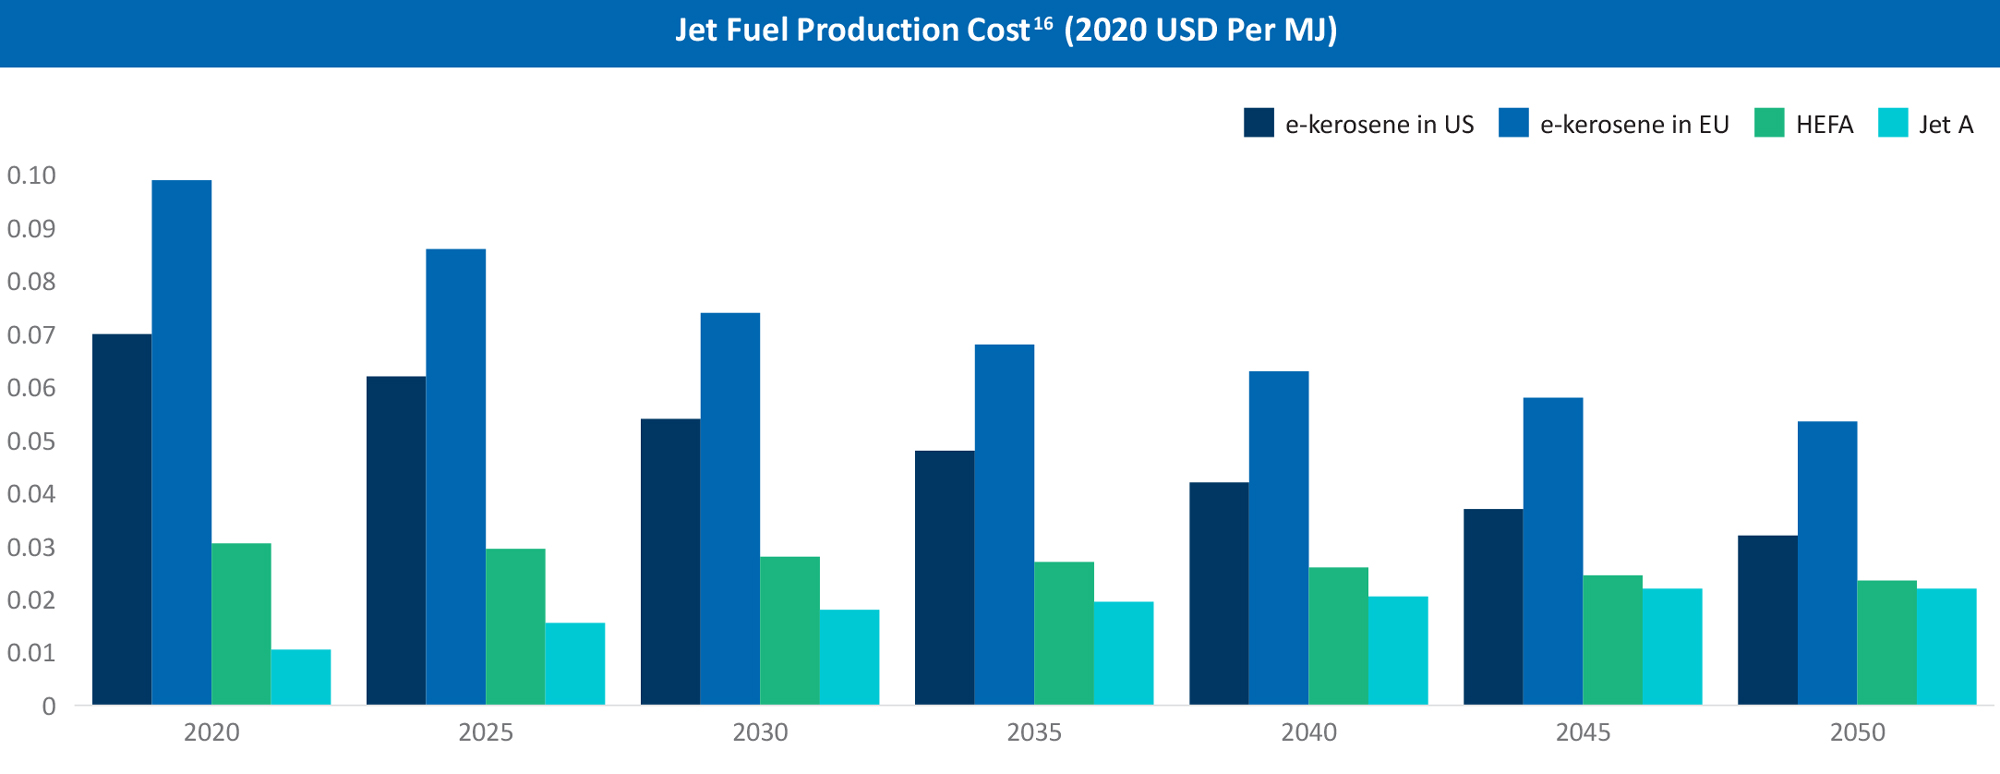 E-Fuels Are Expected To Retain Significant Cost Disadvantages Relative to Traditional Jet Fuel That Will Persist Into 2050